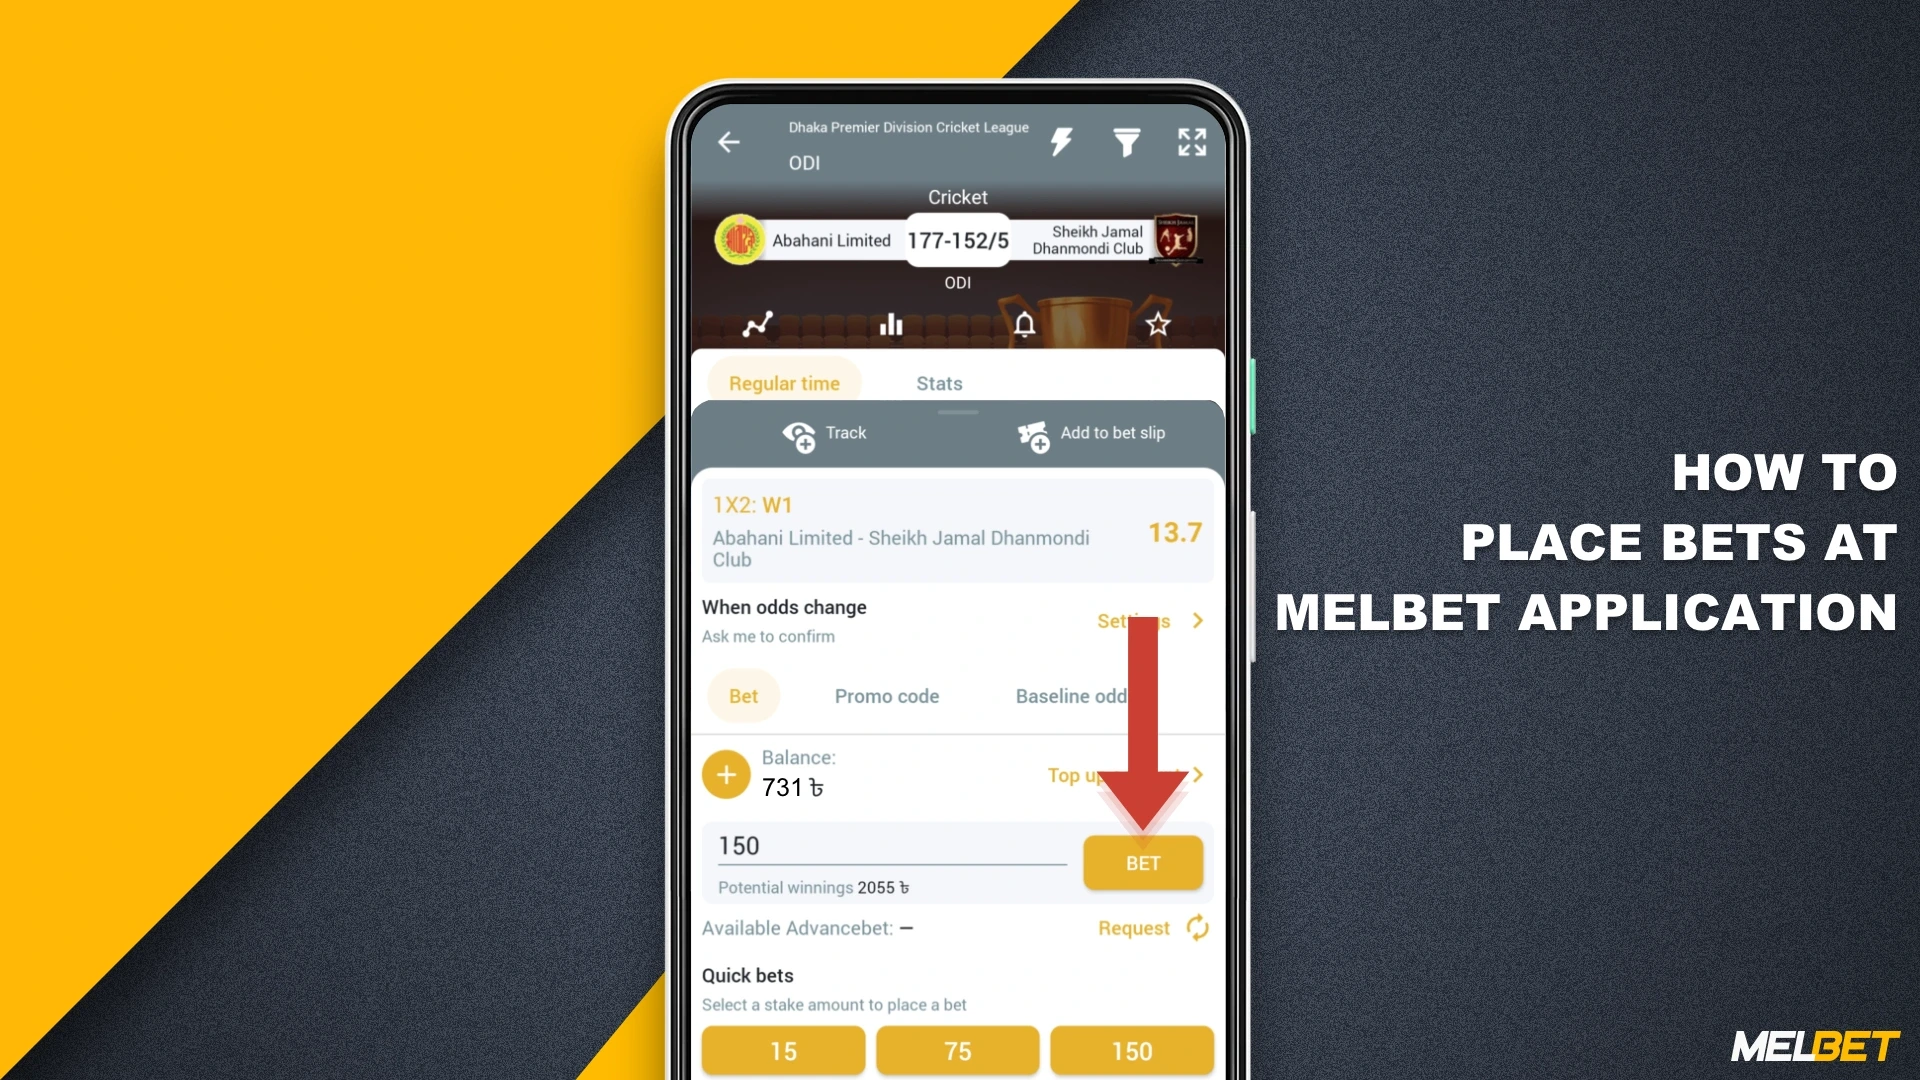 Check out this quick guide on how to place a bet in Melbet's app